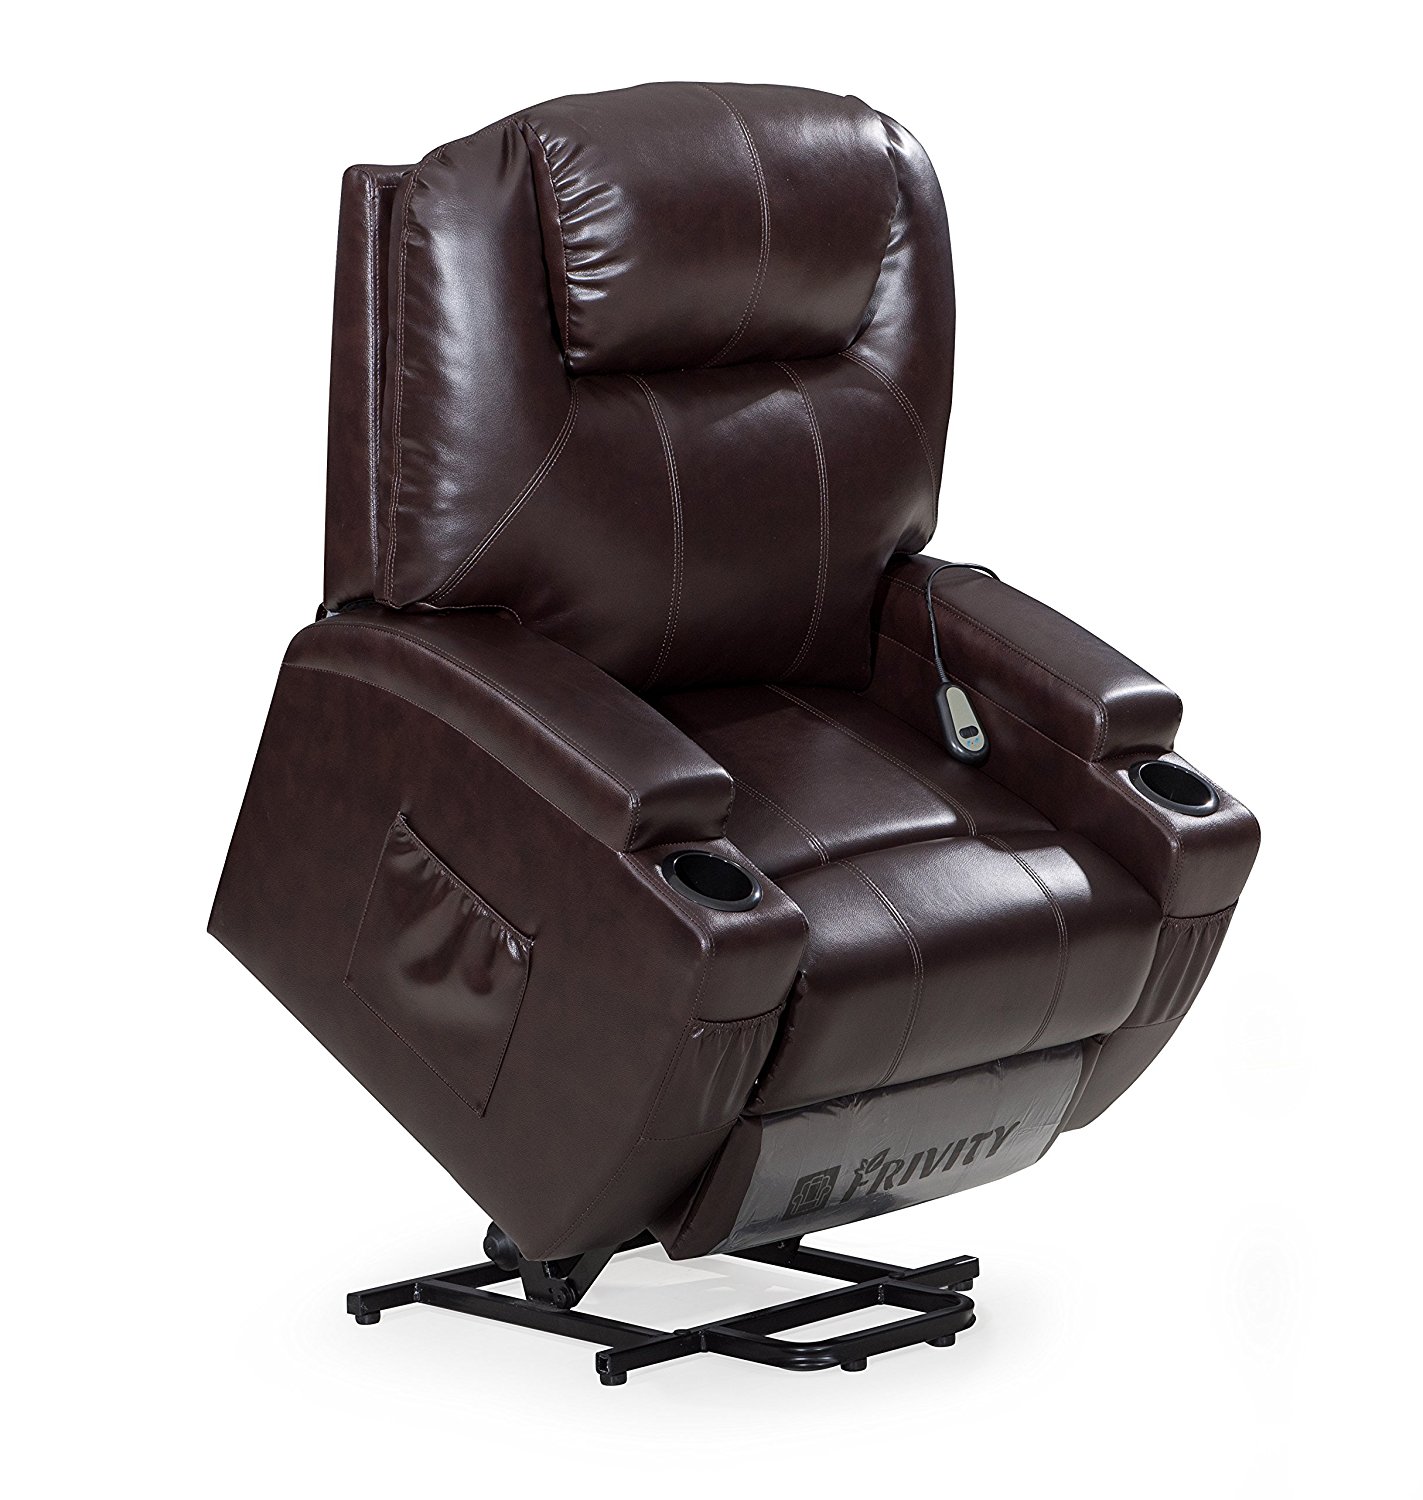 Frivity Power Lift Recliner Chair Classic and Traditional Bonded Leather 1 Seat Sofa Lift Reclining Armchair with Padded Arms and Back (Brown-Lift)